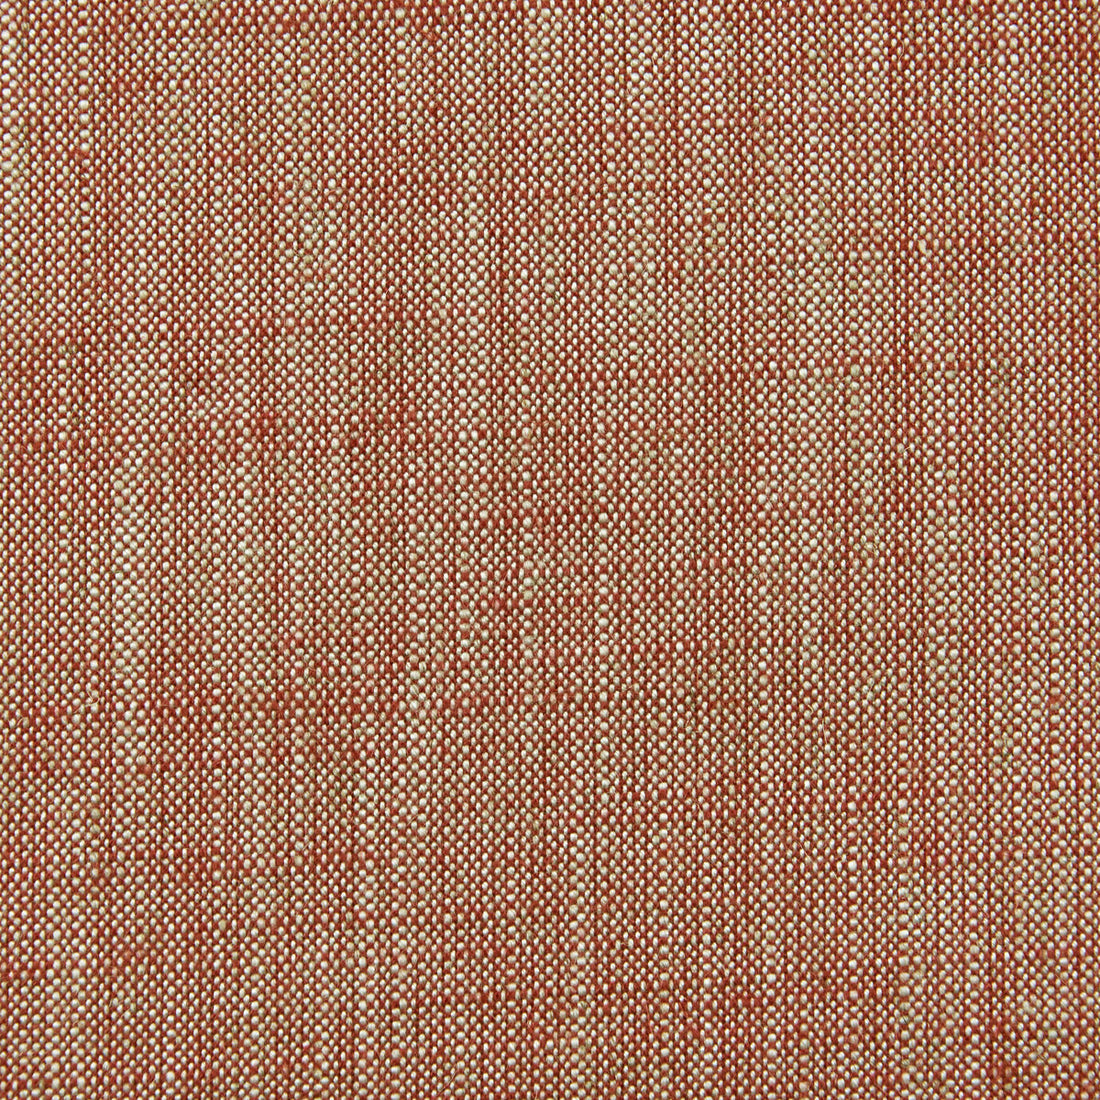 Biarritz fabric in spice color - pattern F0965/45.CAC.0 - by Clarke And Clarke in the Clarke &amp; Clarke Biarritz collection